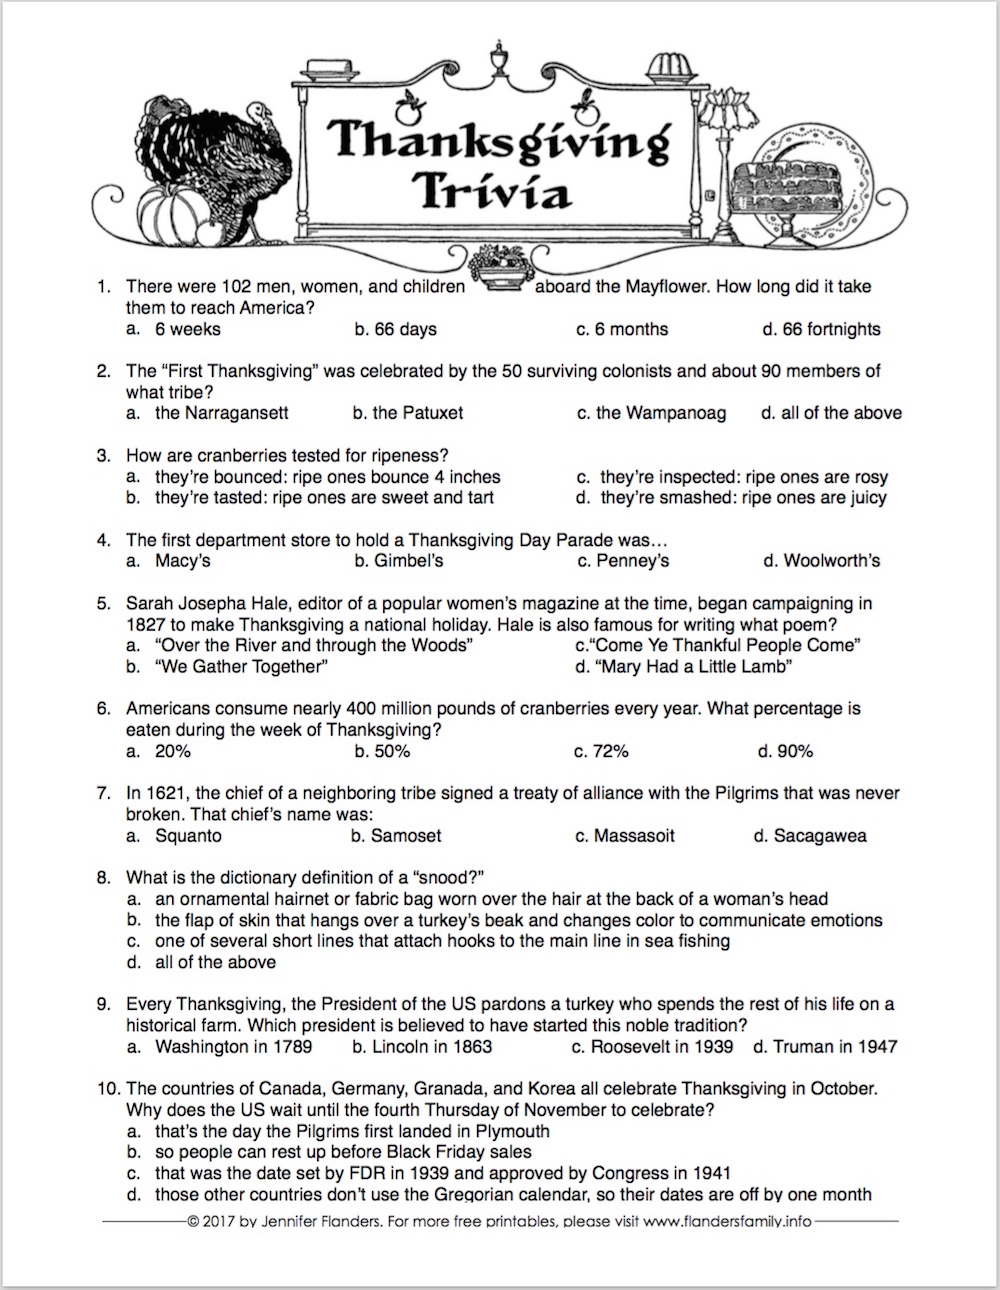 Test Your Knowledge: Thanksgiving Trivia - Flanders Family Homelife